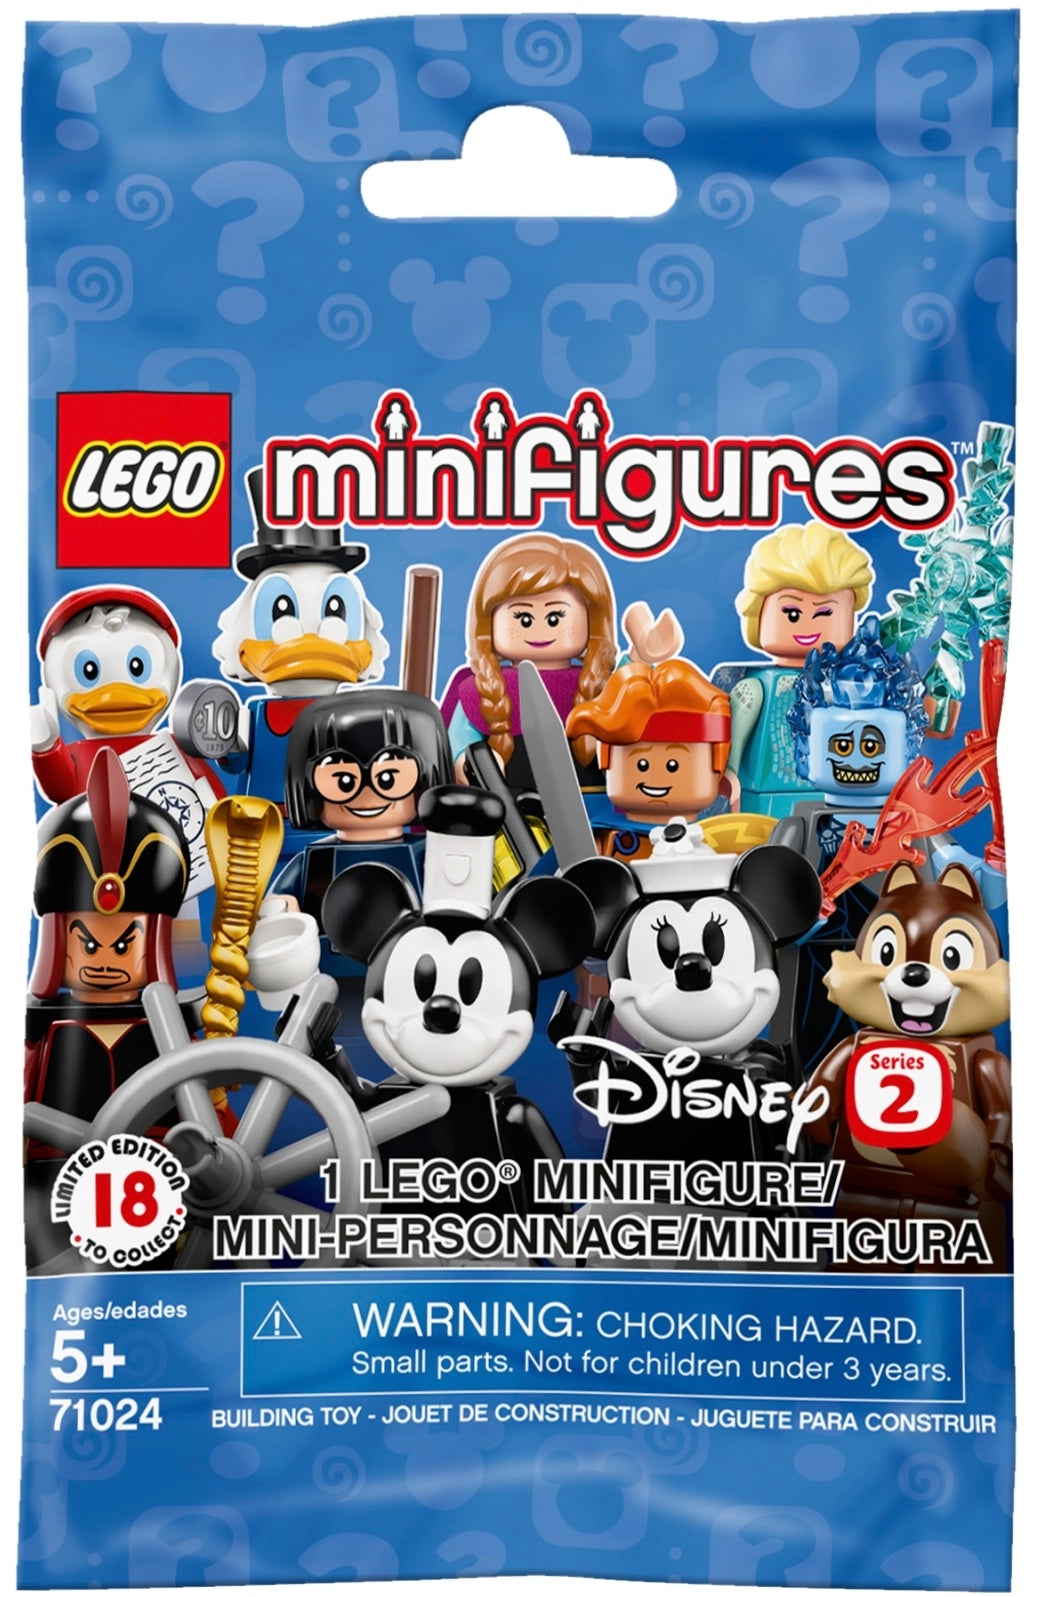 LEGO Disney Series 2 Limited Edition Chip Minifigure 71024